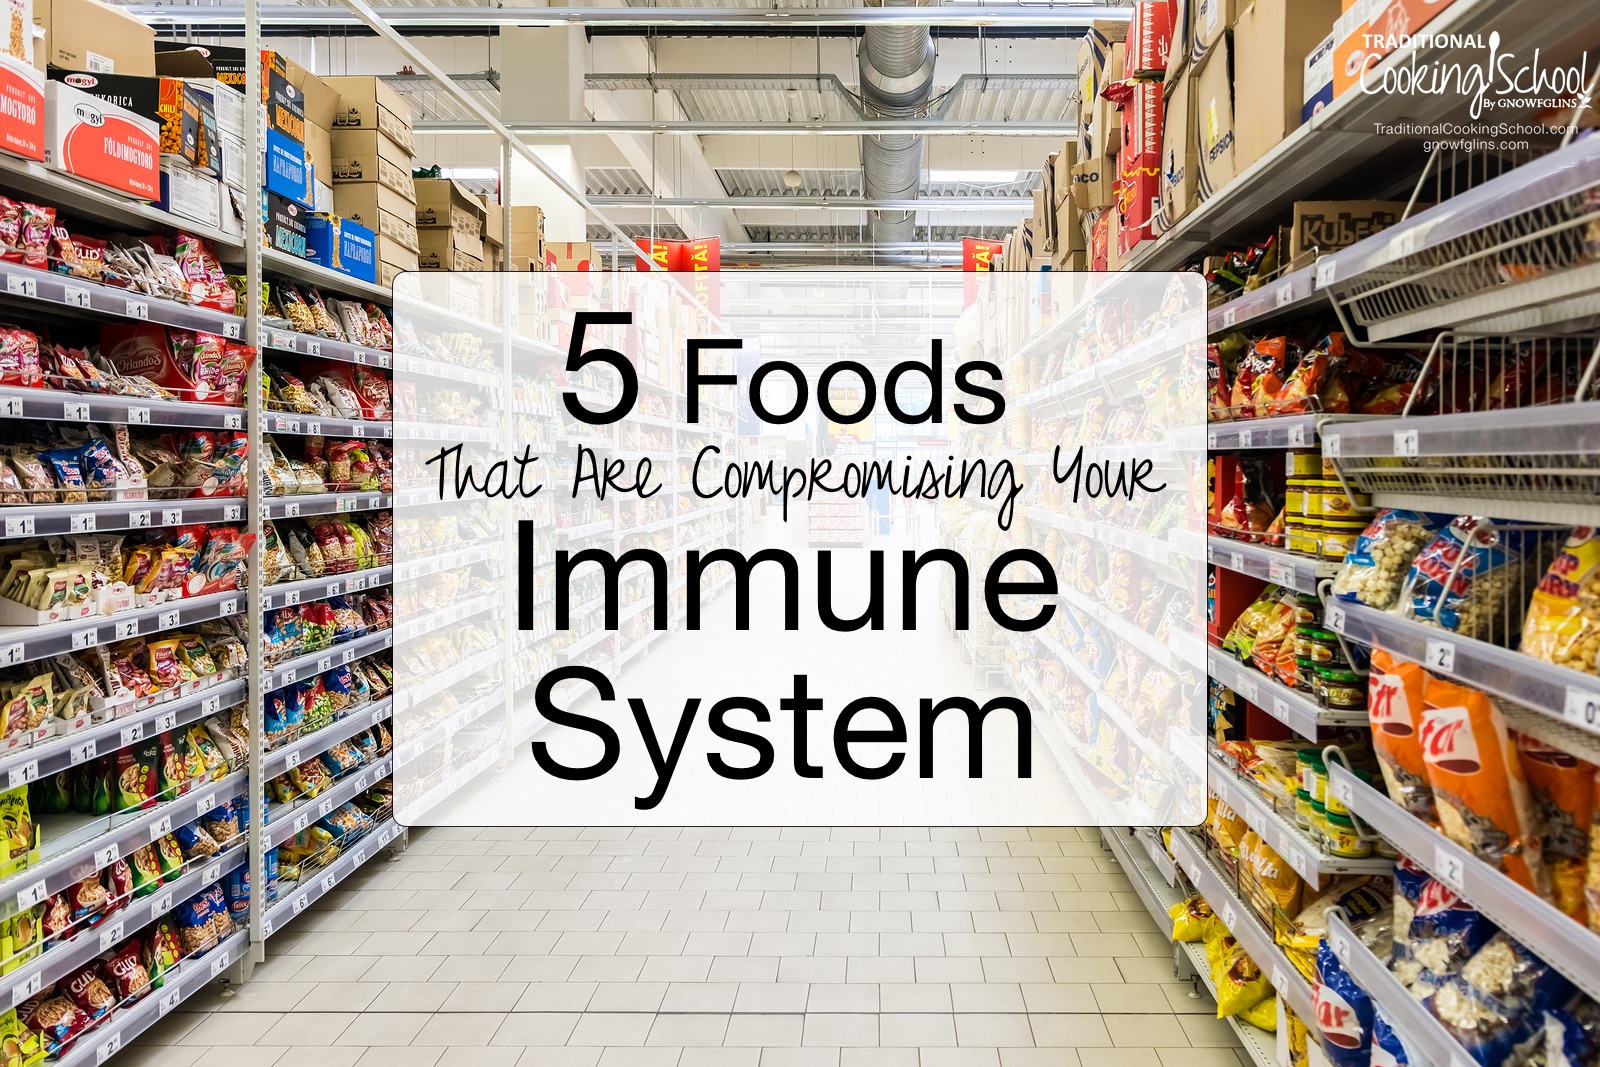 5 Foods That Are Compromising Your Immune System | The one thing that could be hurting your immune system? It's not how much you exercise, what supplements you take, or what natural practitioner you visit. Can you guess what that one thing is? It's the food you eat! Here are the top five foods you can reduce or eliminate for the sake of your immune system. | TraditionalCookingSchool.com